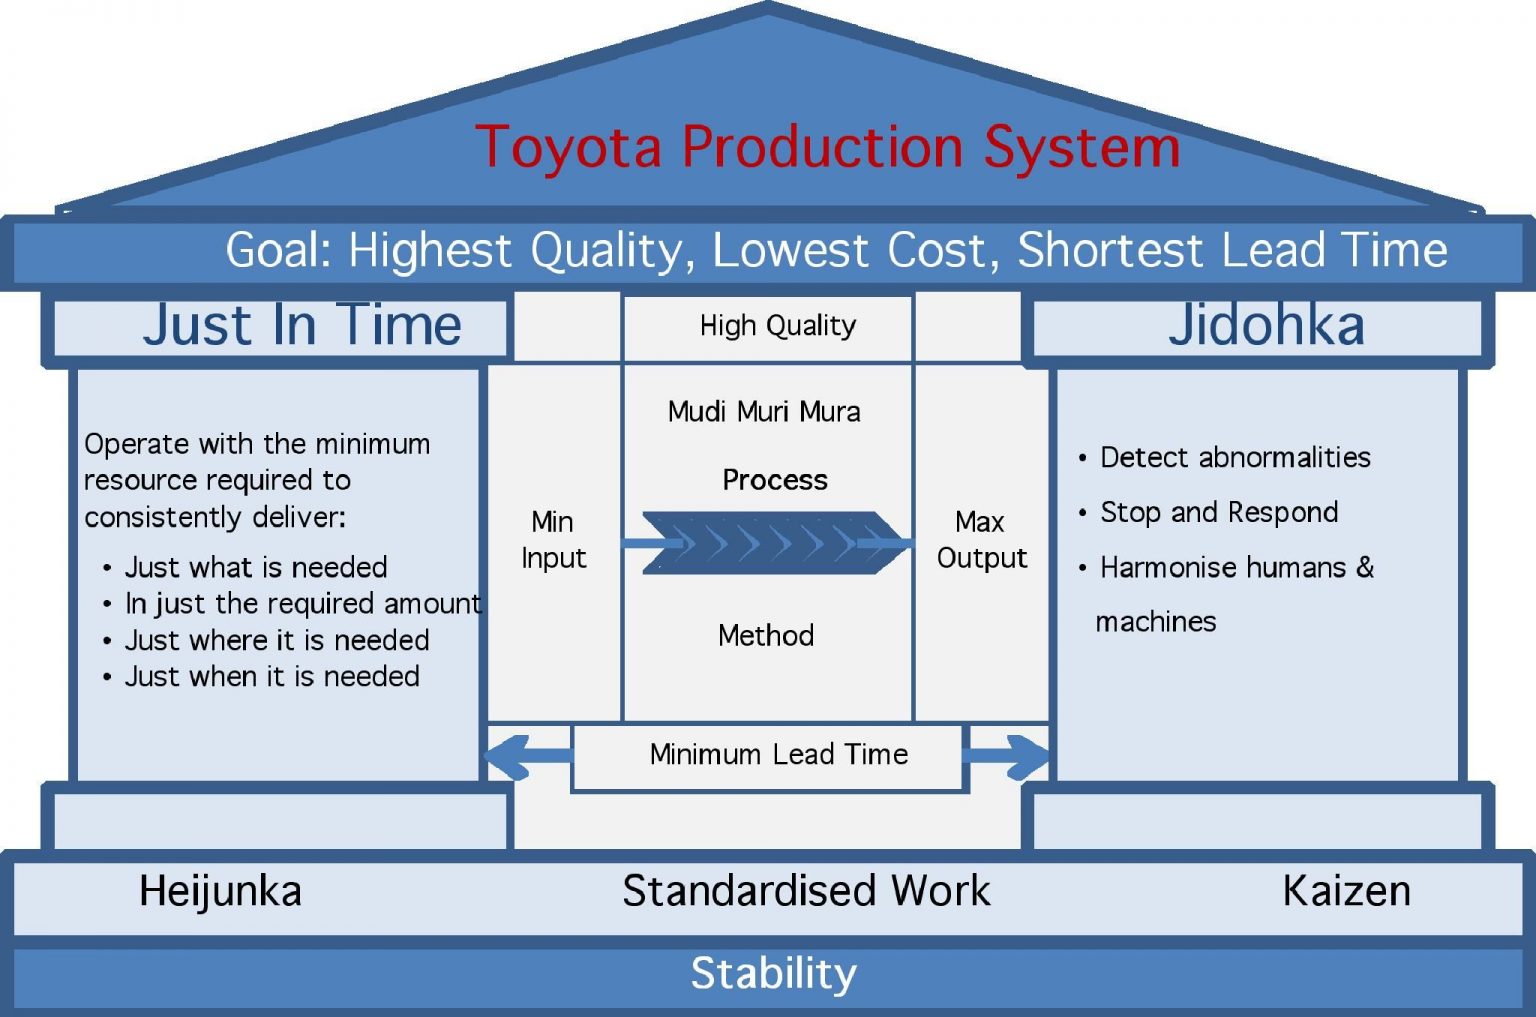 total quality management case study toyota